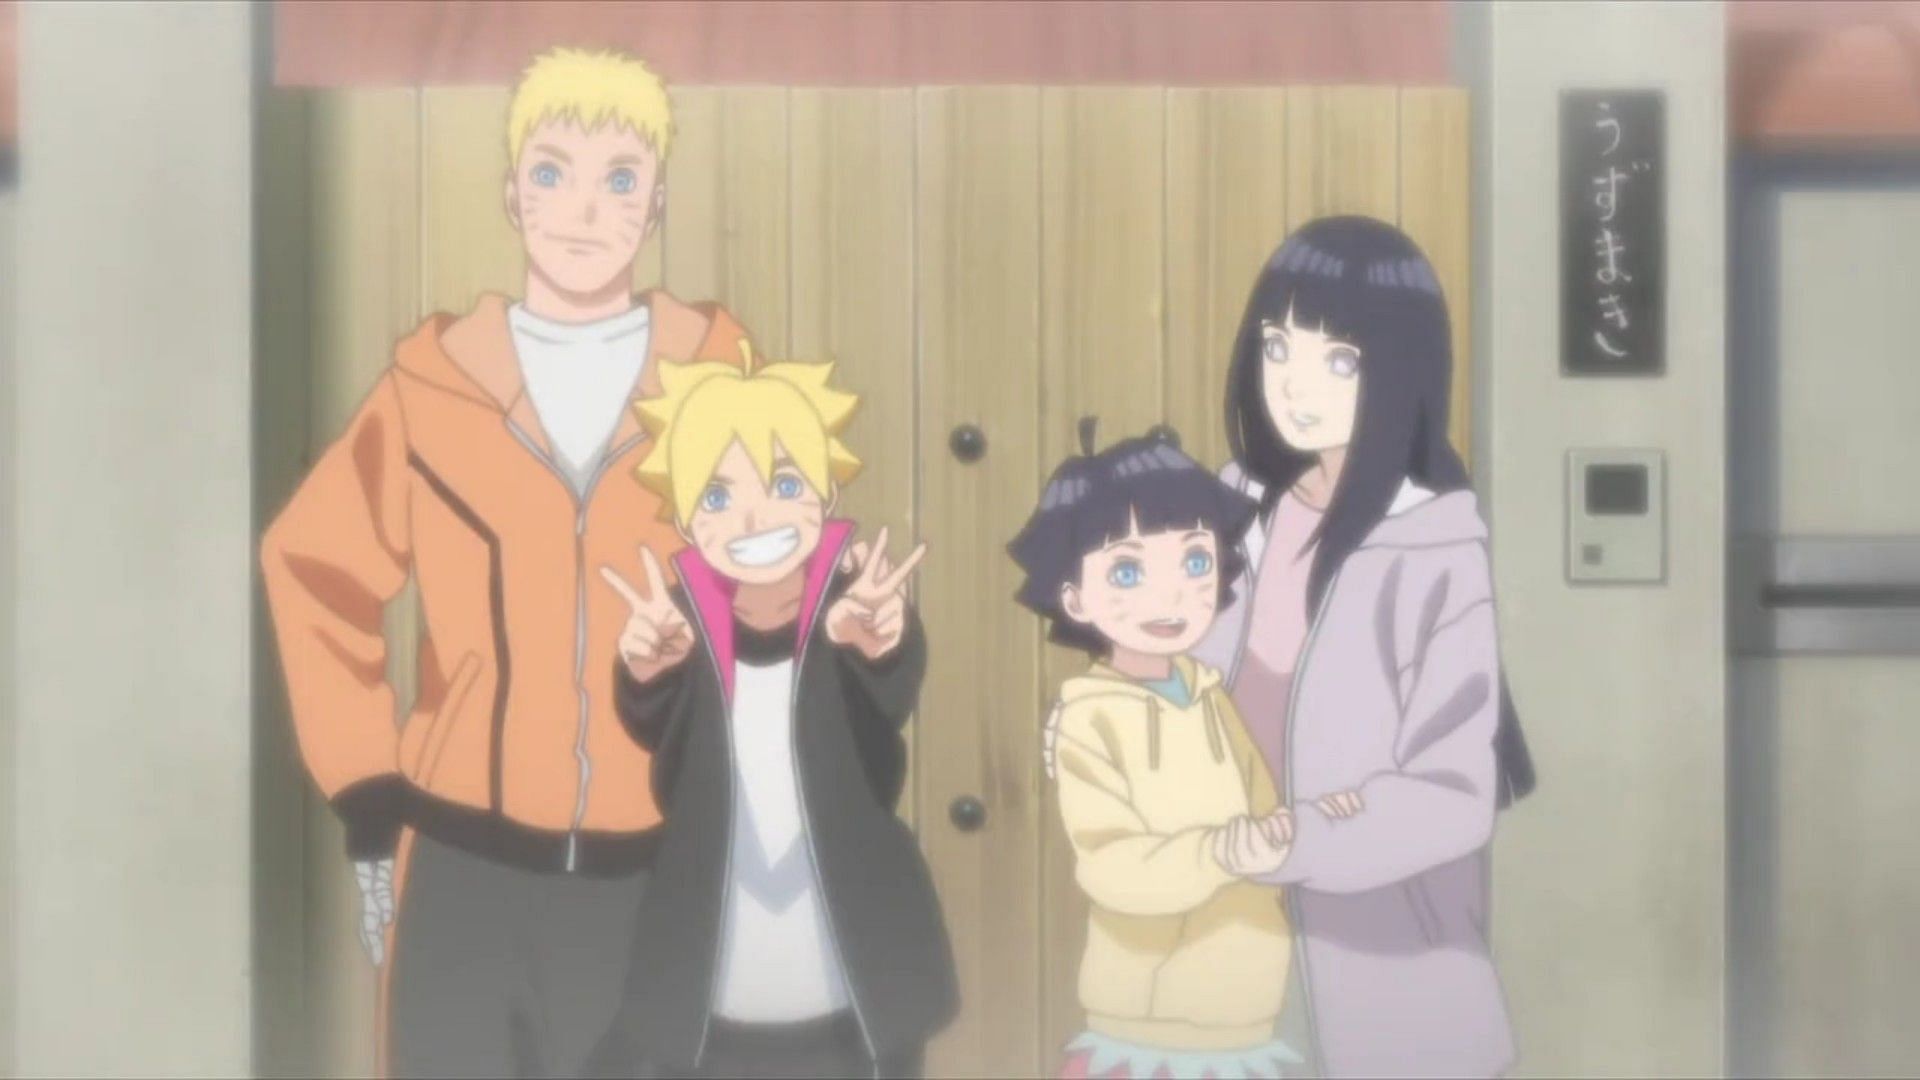 10 best parents in Naruto and Boruto, ranked